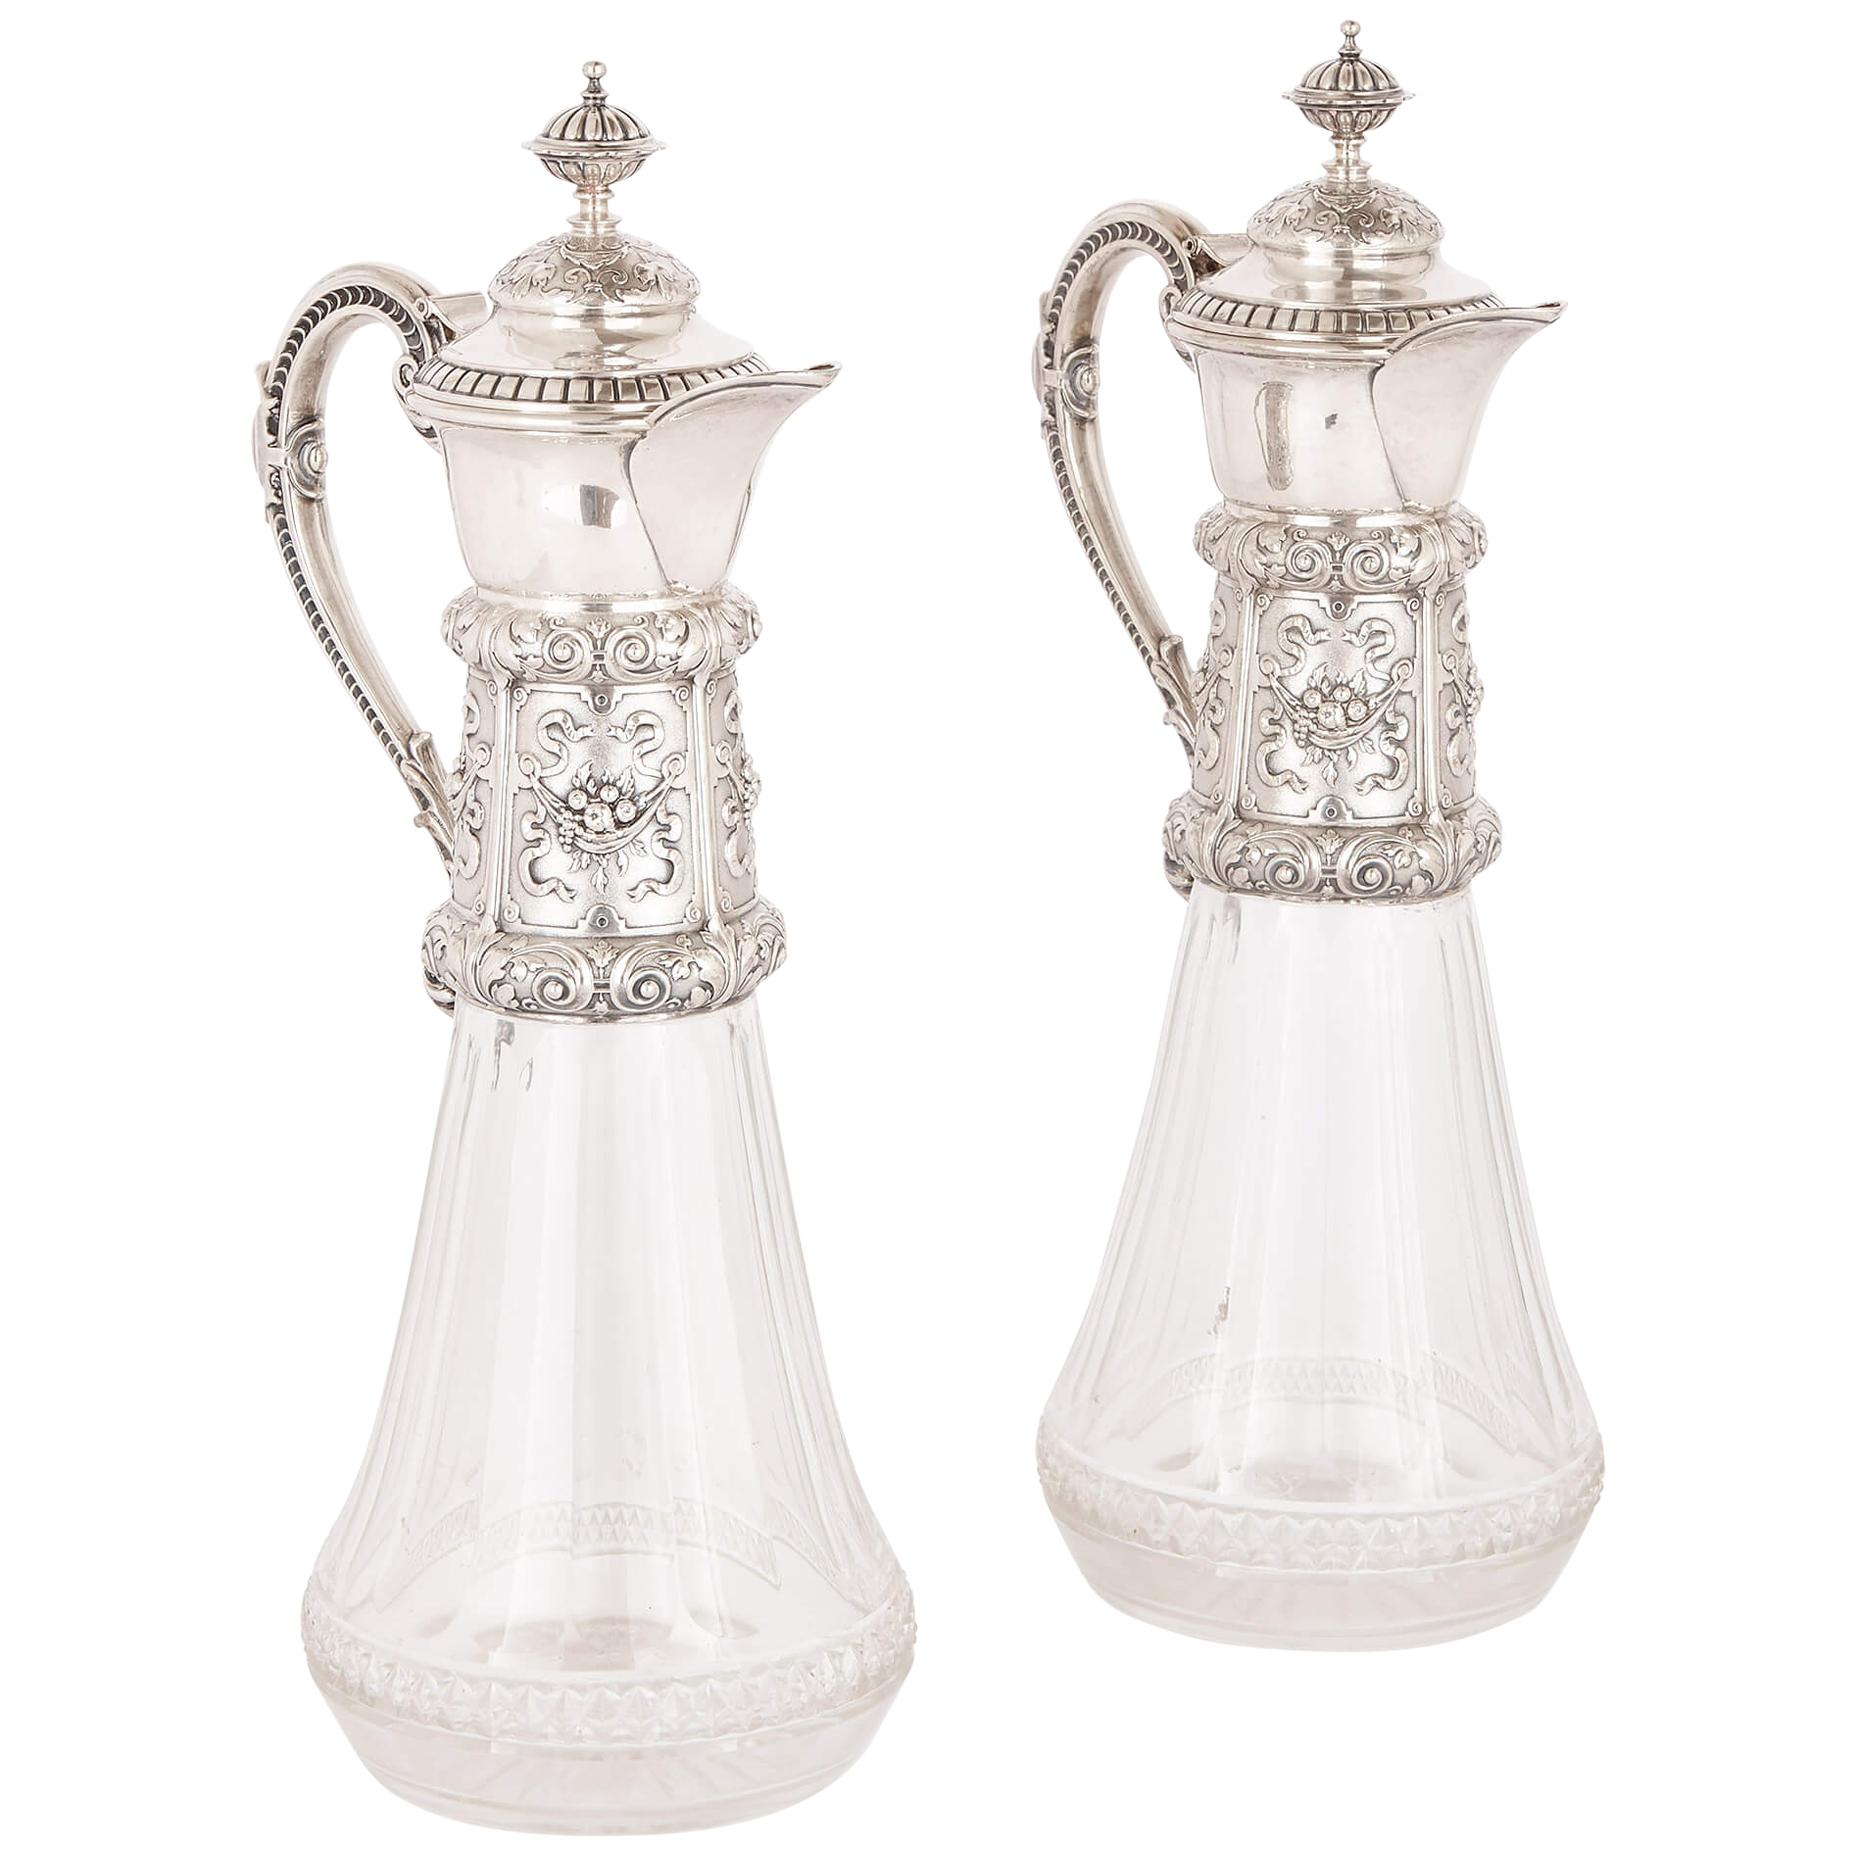 Two Cut Glass and Silver Claret Jugs, 19th Century